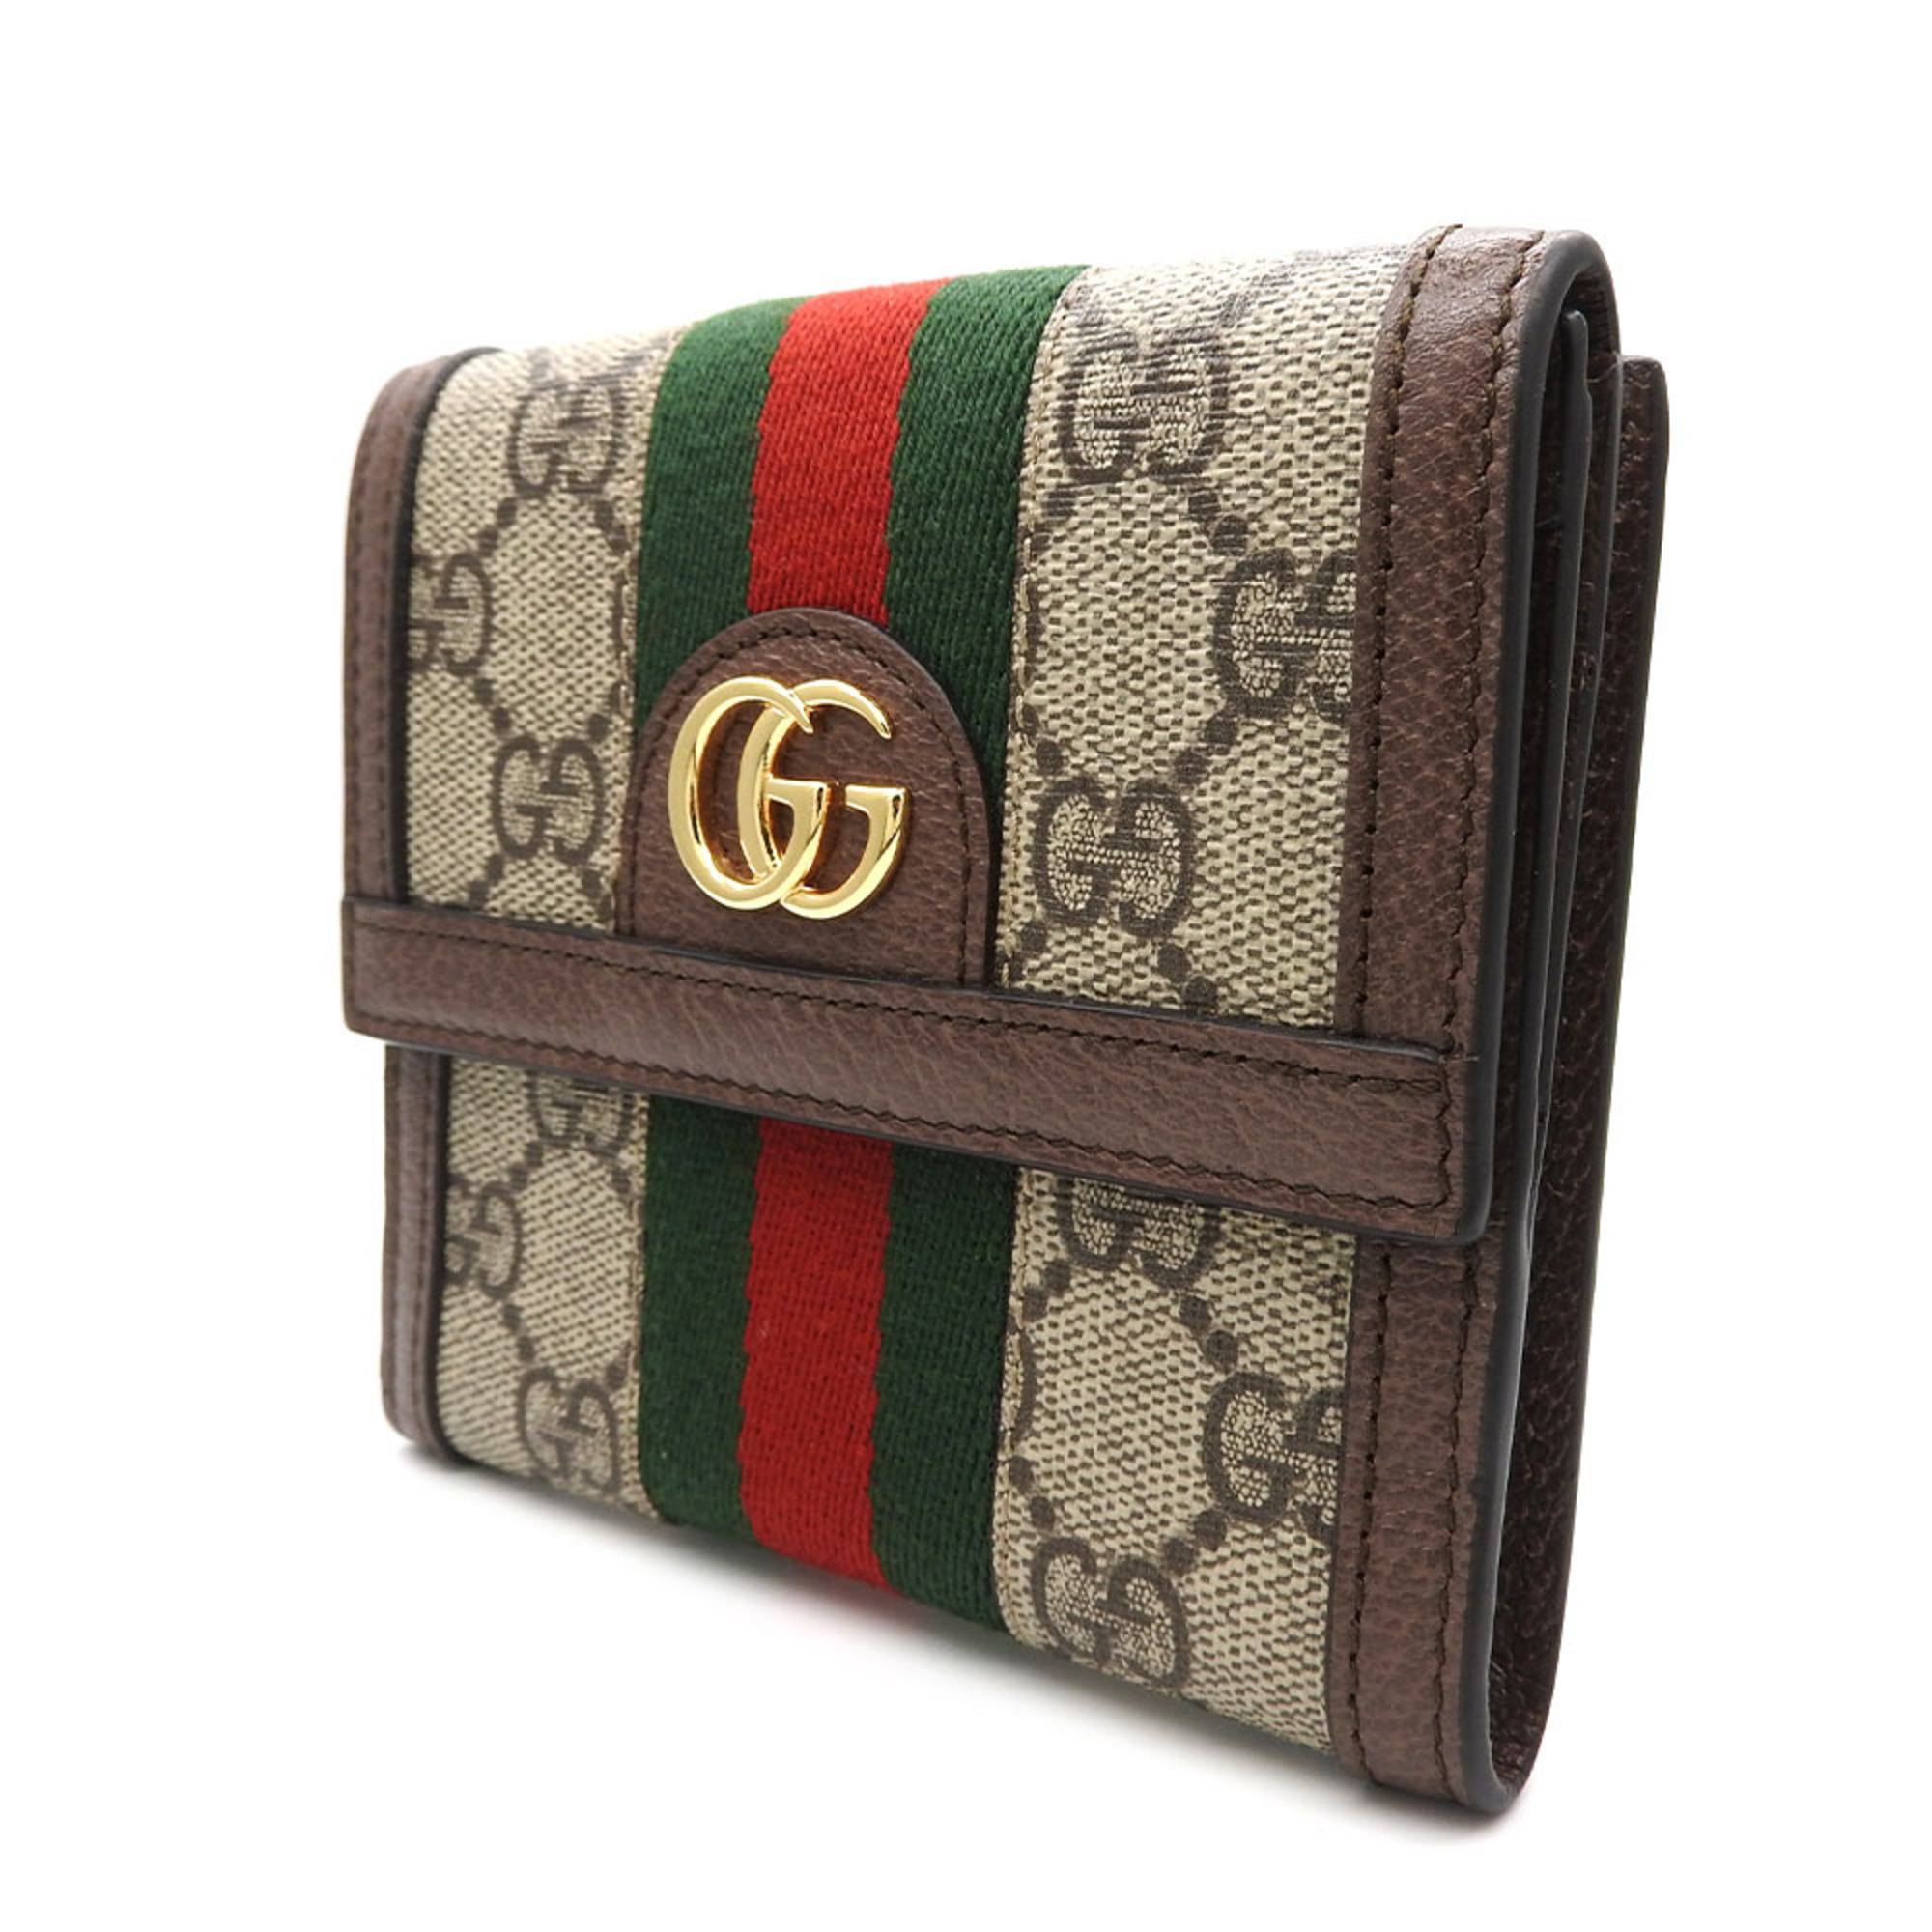 Gucci W Wallet Compact Offdia Sherry Line GG Supreme 523173 Beige Red Green Leather Ladies Men's Unisex GUCCI wallet pvc